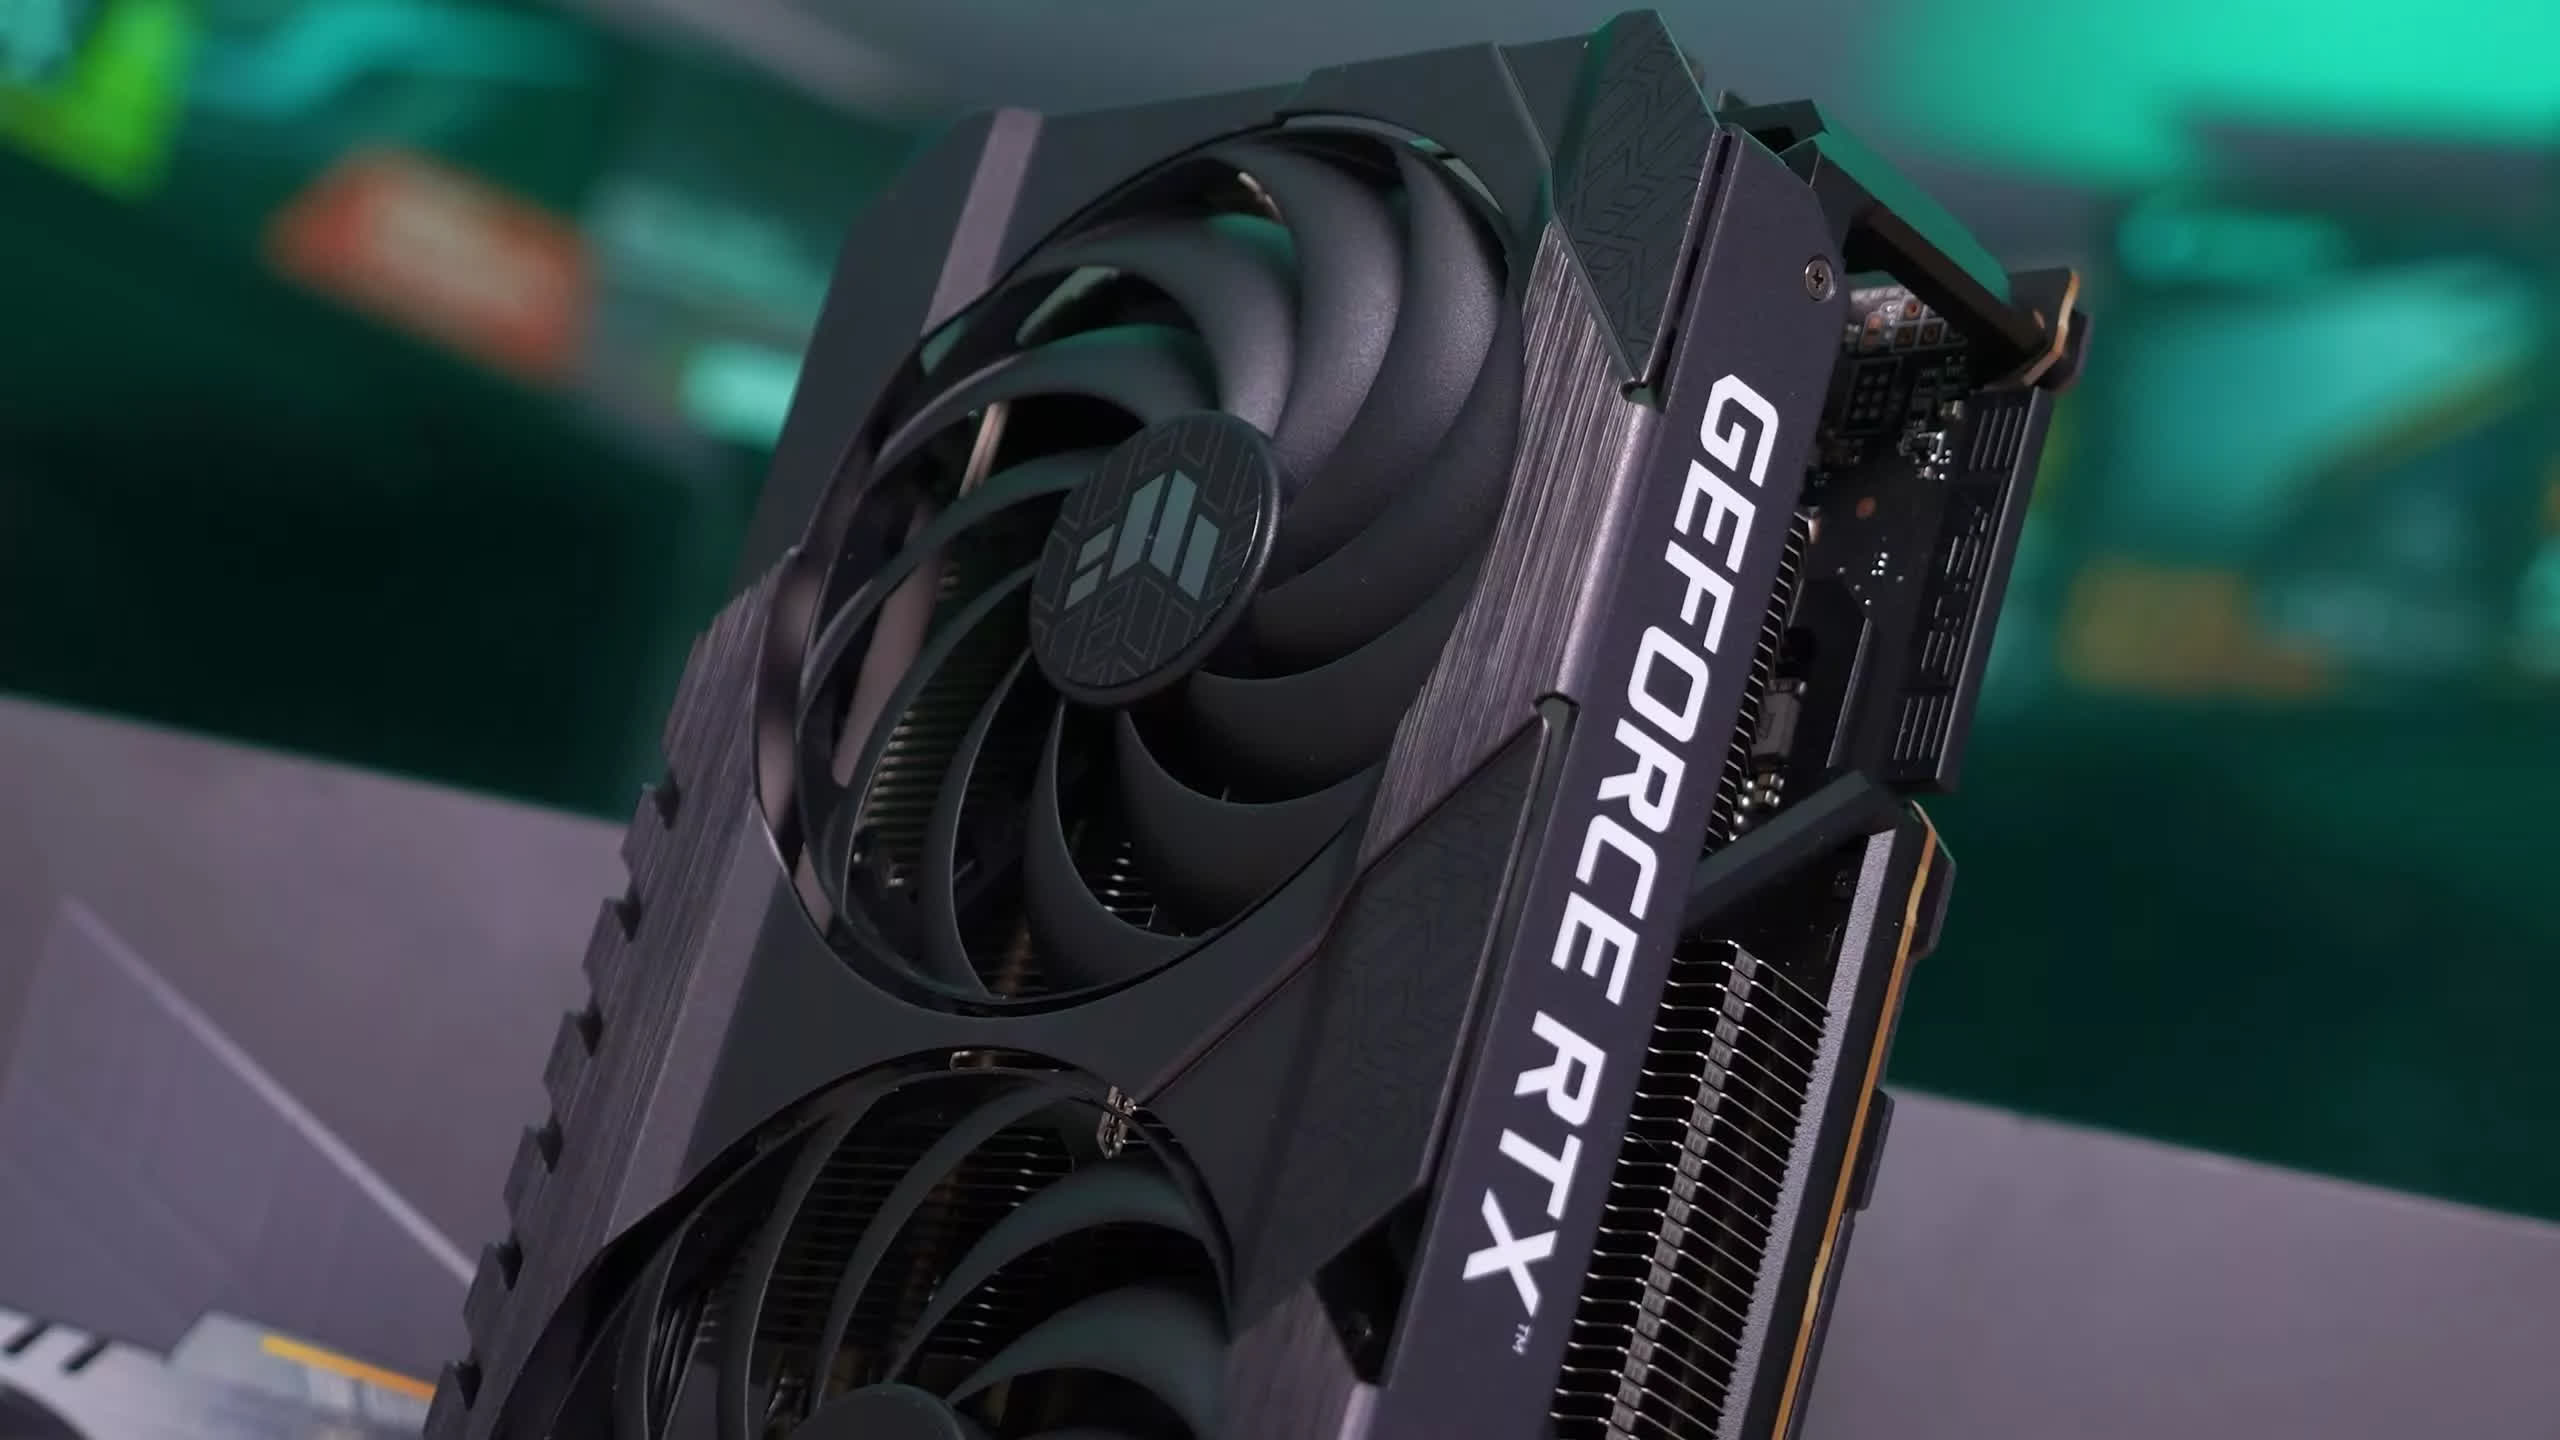 Prices of high-end RTX 3000 cards keep falling